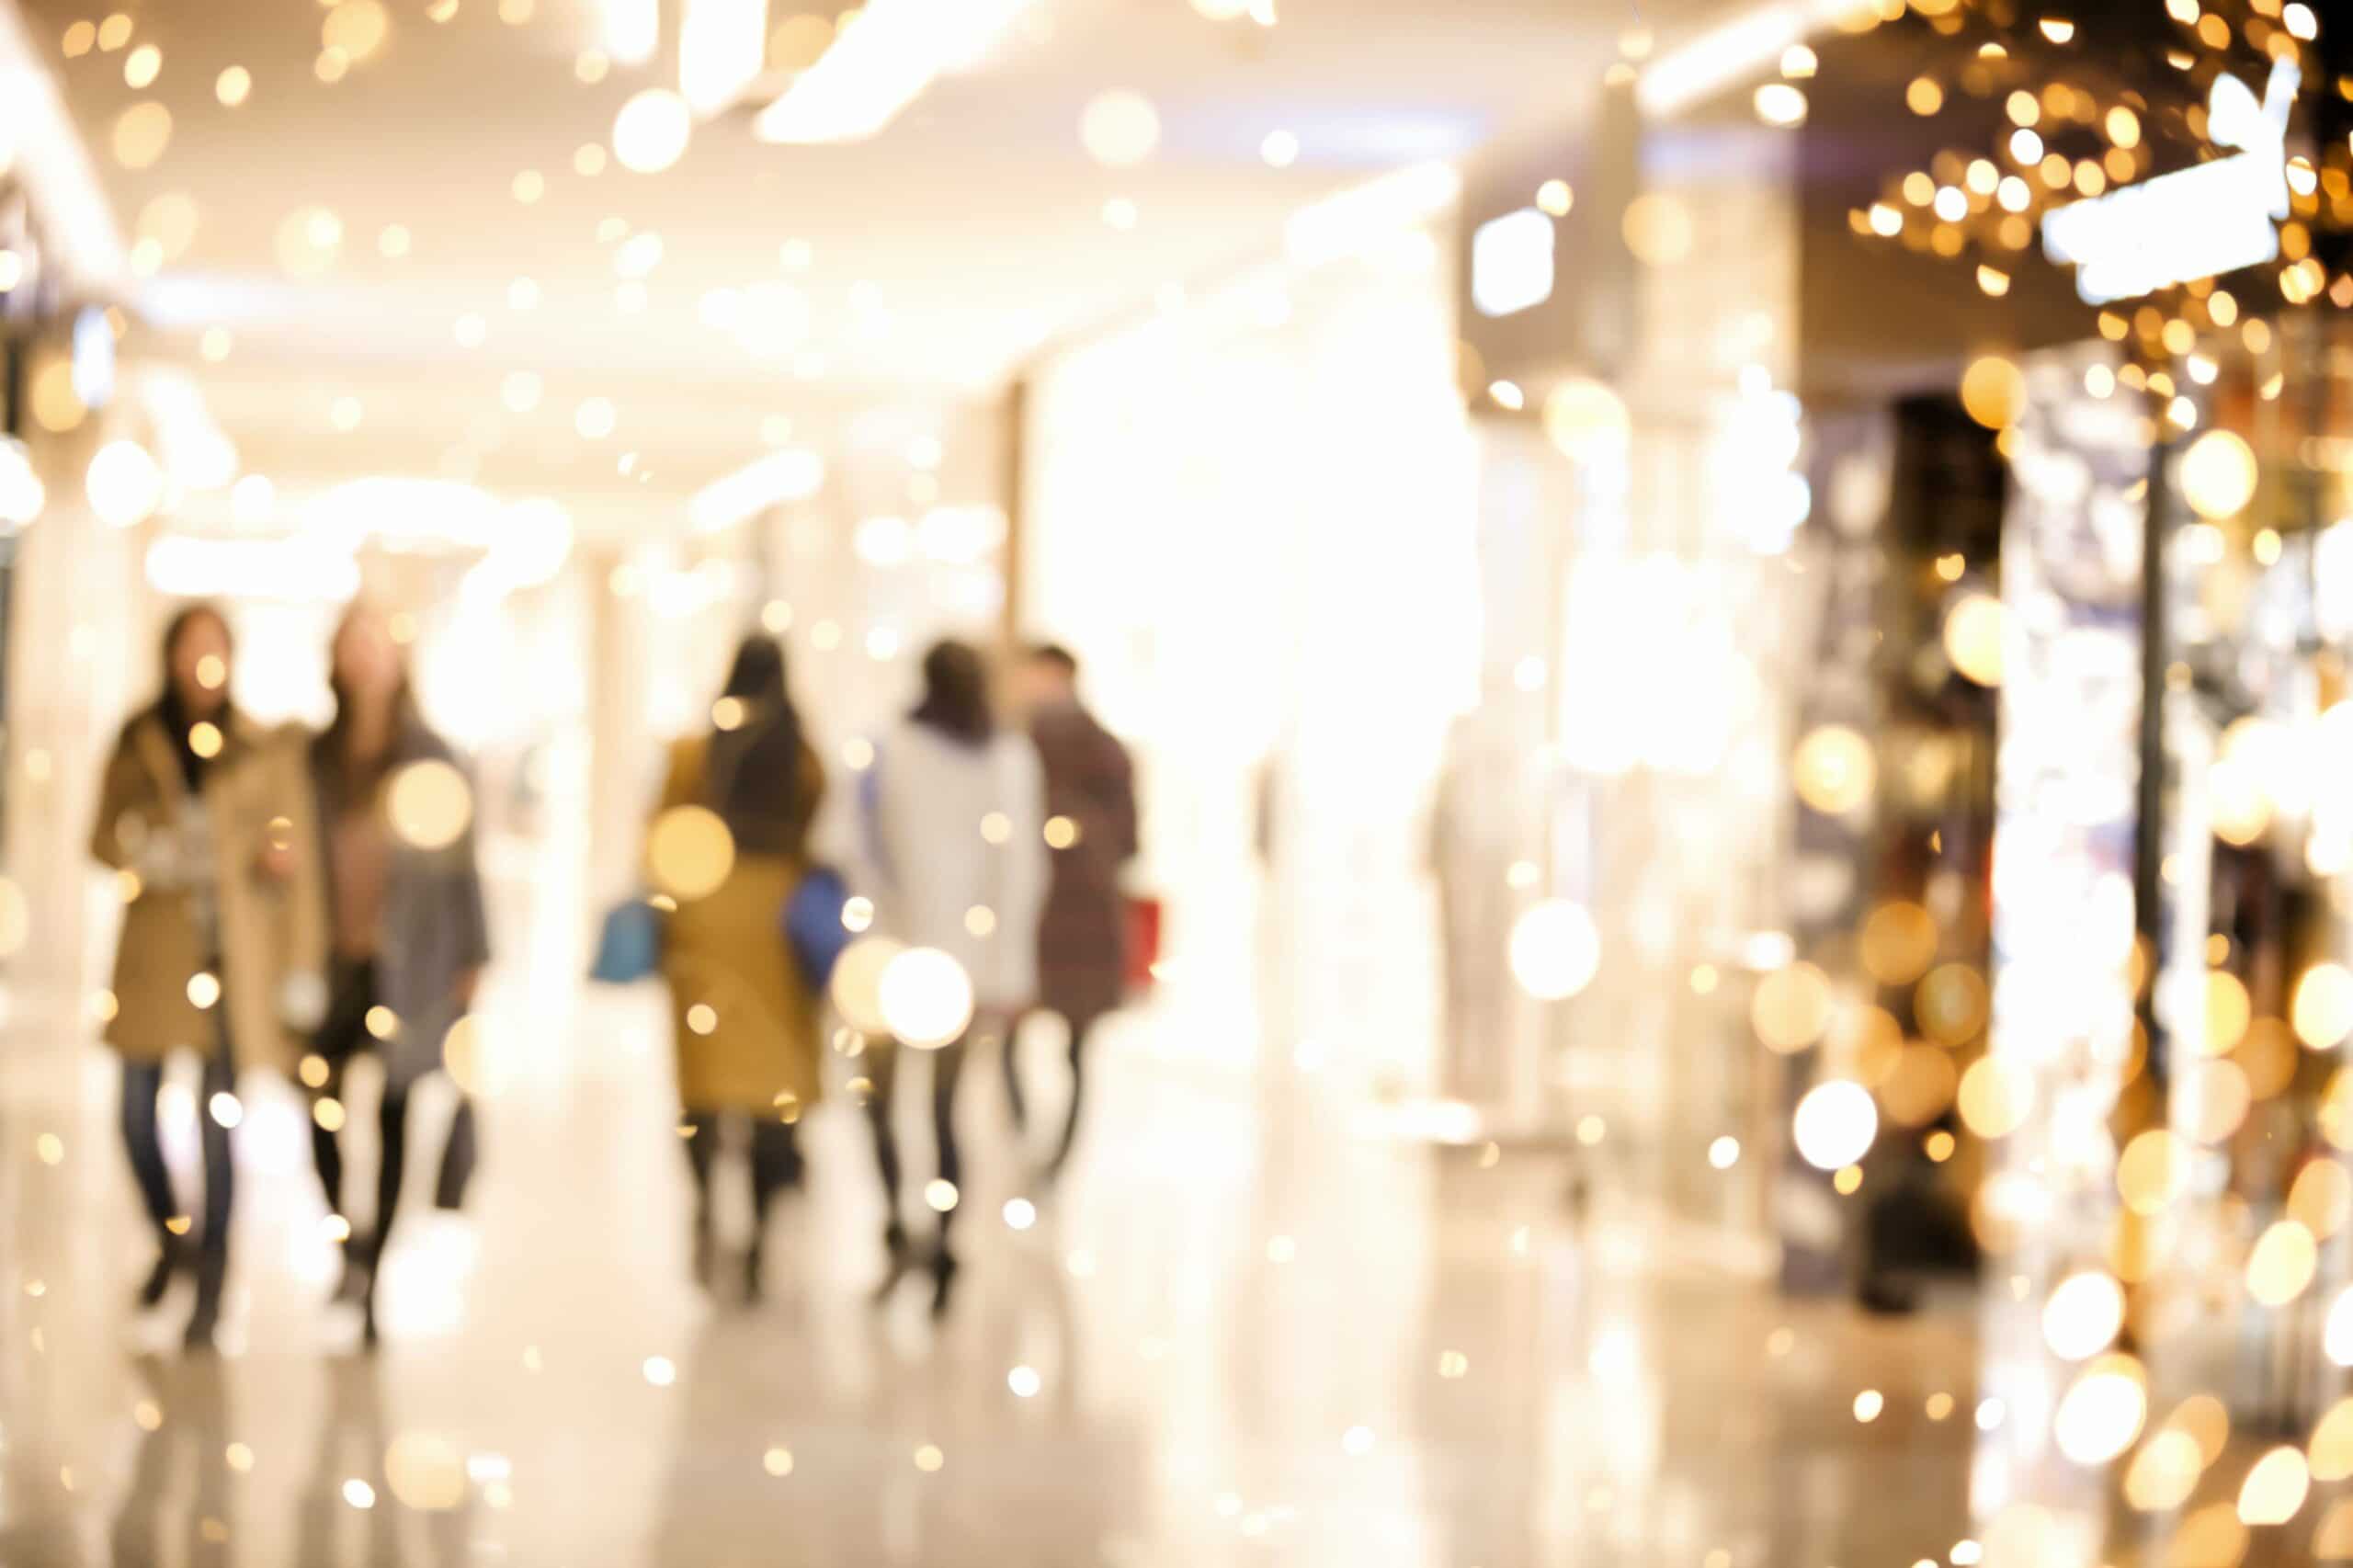 Shopping mall blur background with holiday lights